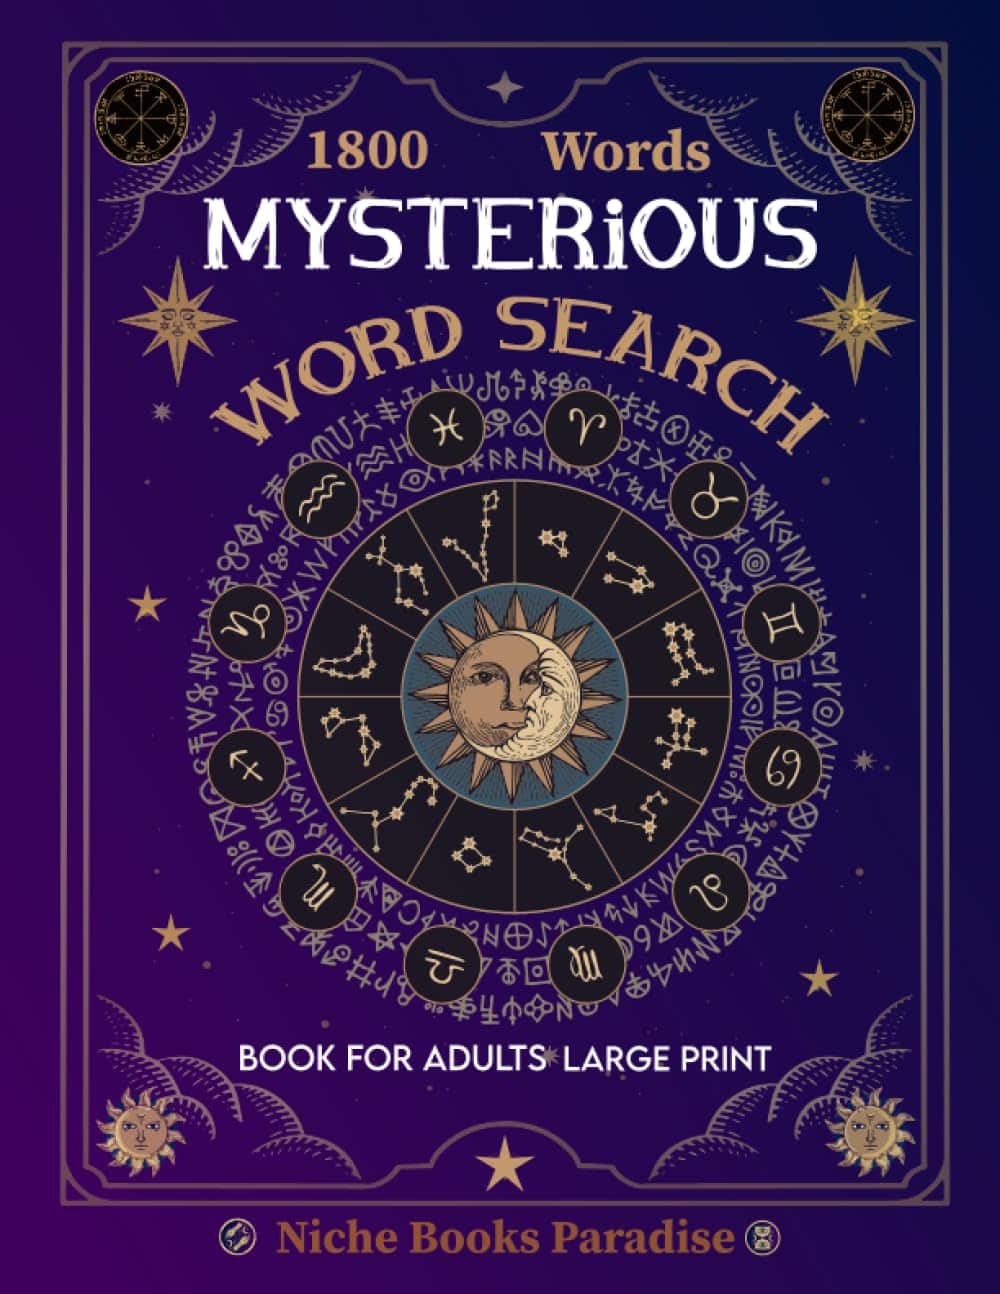 A purple cover with a circle of symbols Description automatically generated